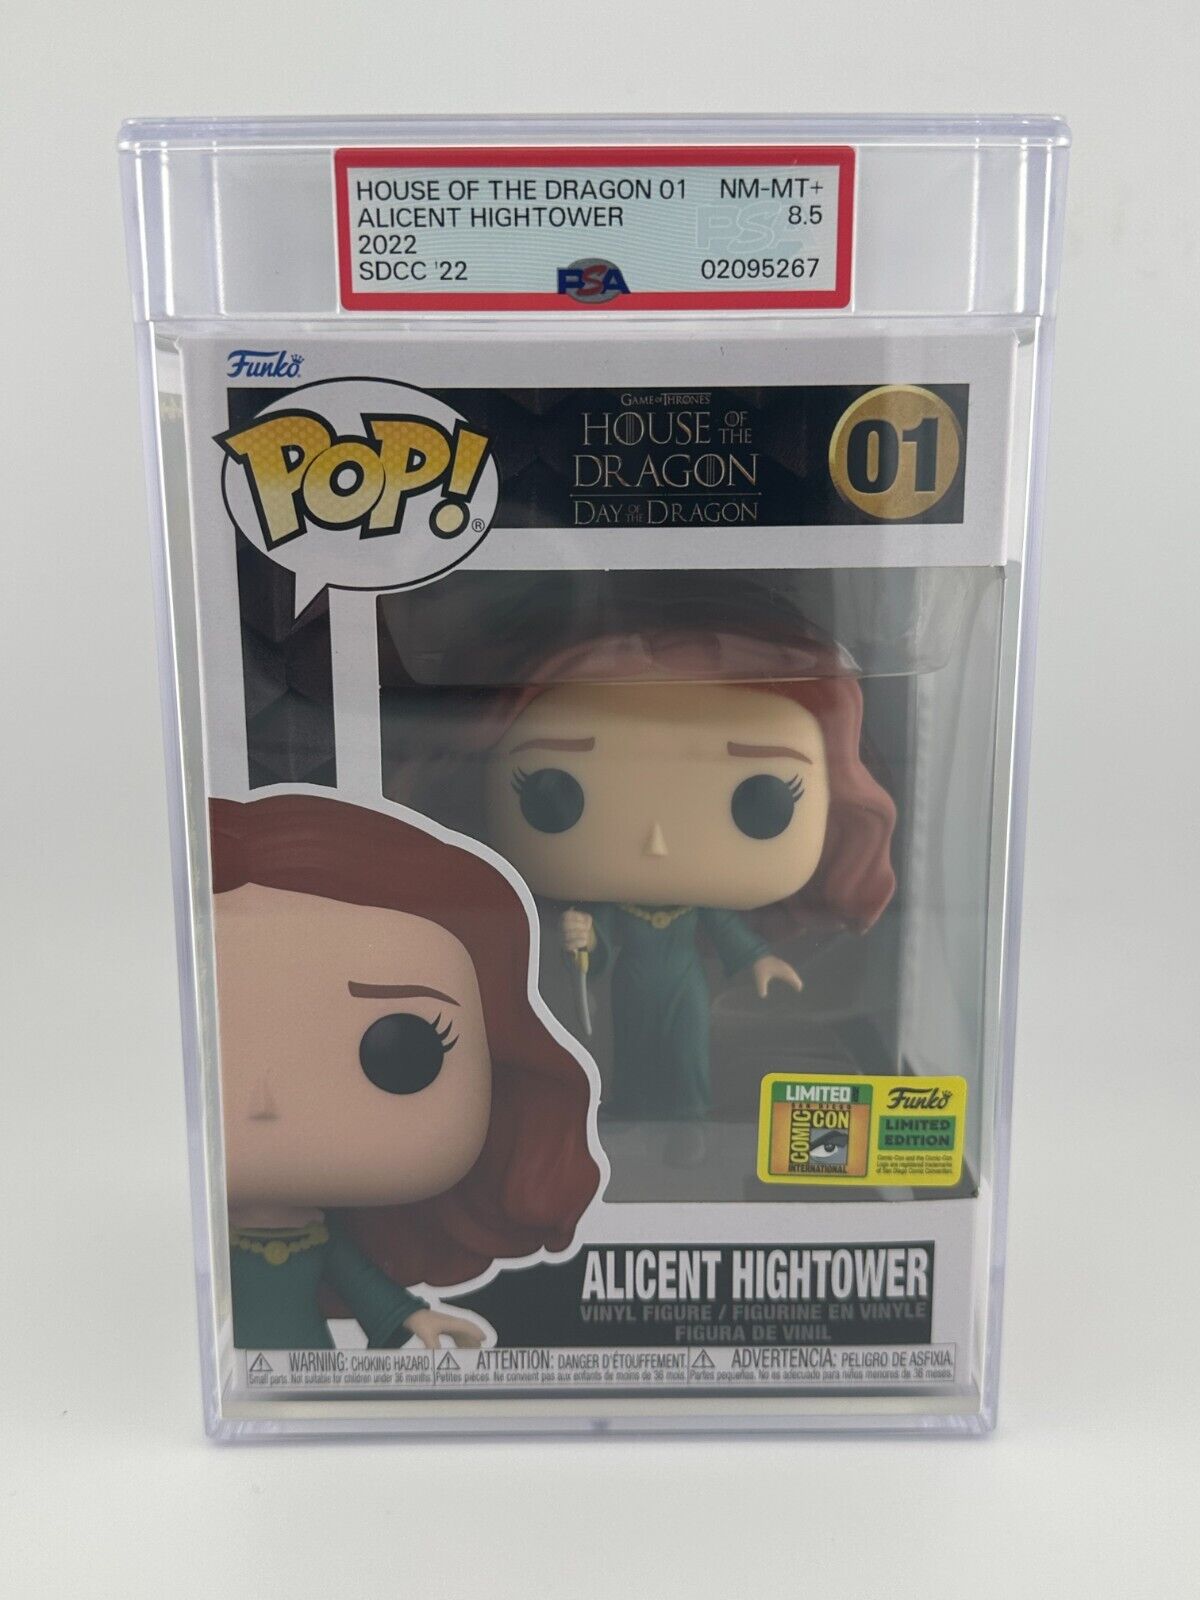 PSA 9 MINT Alicent Hightower House Of The Dragon SDCC Exclusive Funko Pop